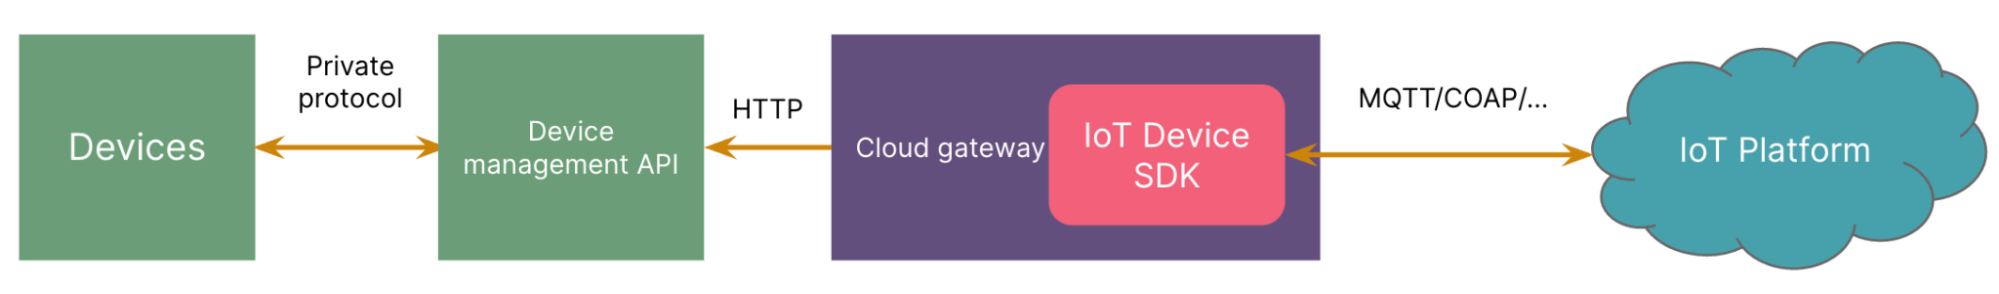 Devices that connect to the cloud gateway indirectly